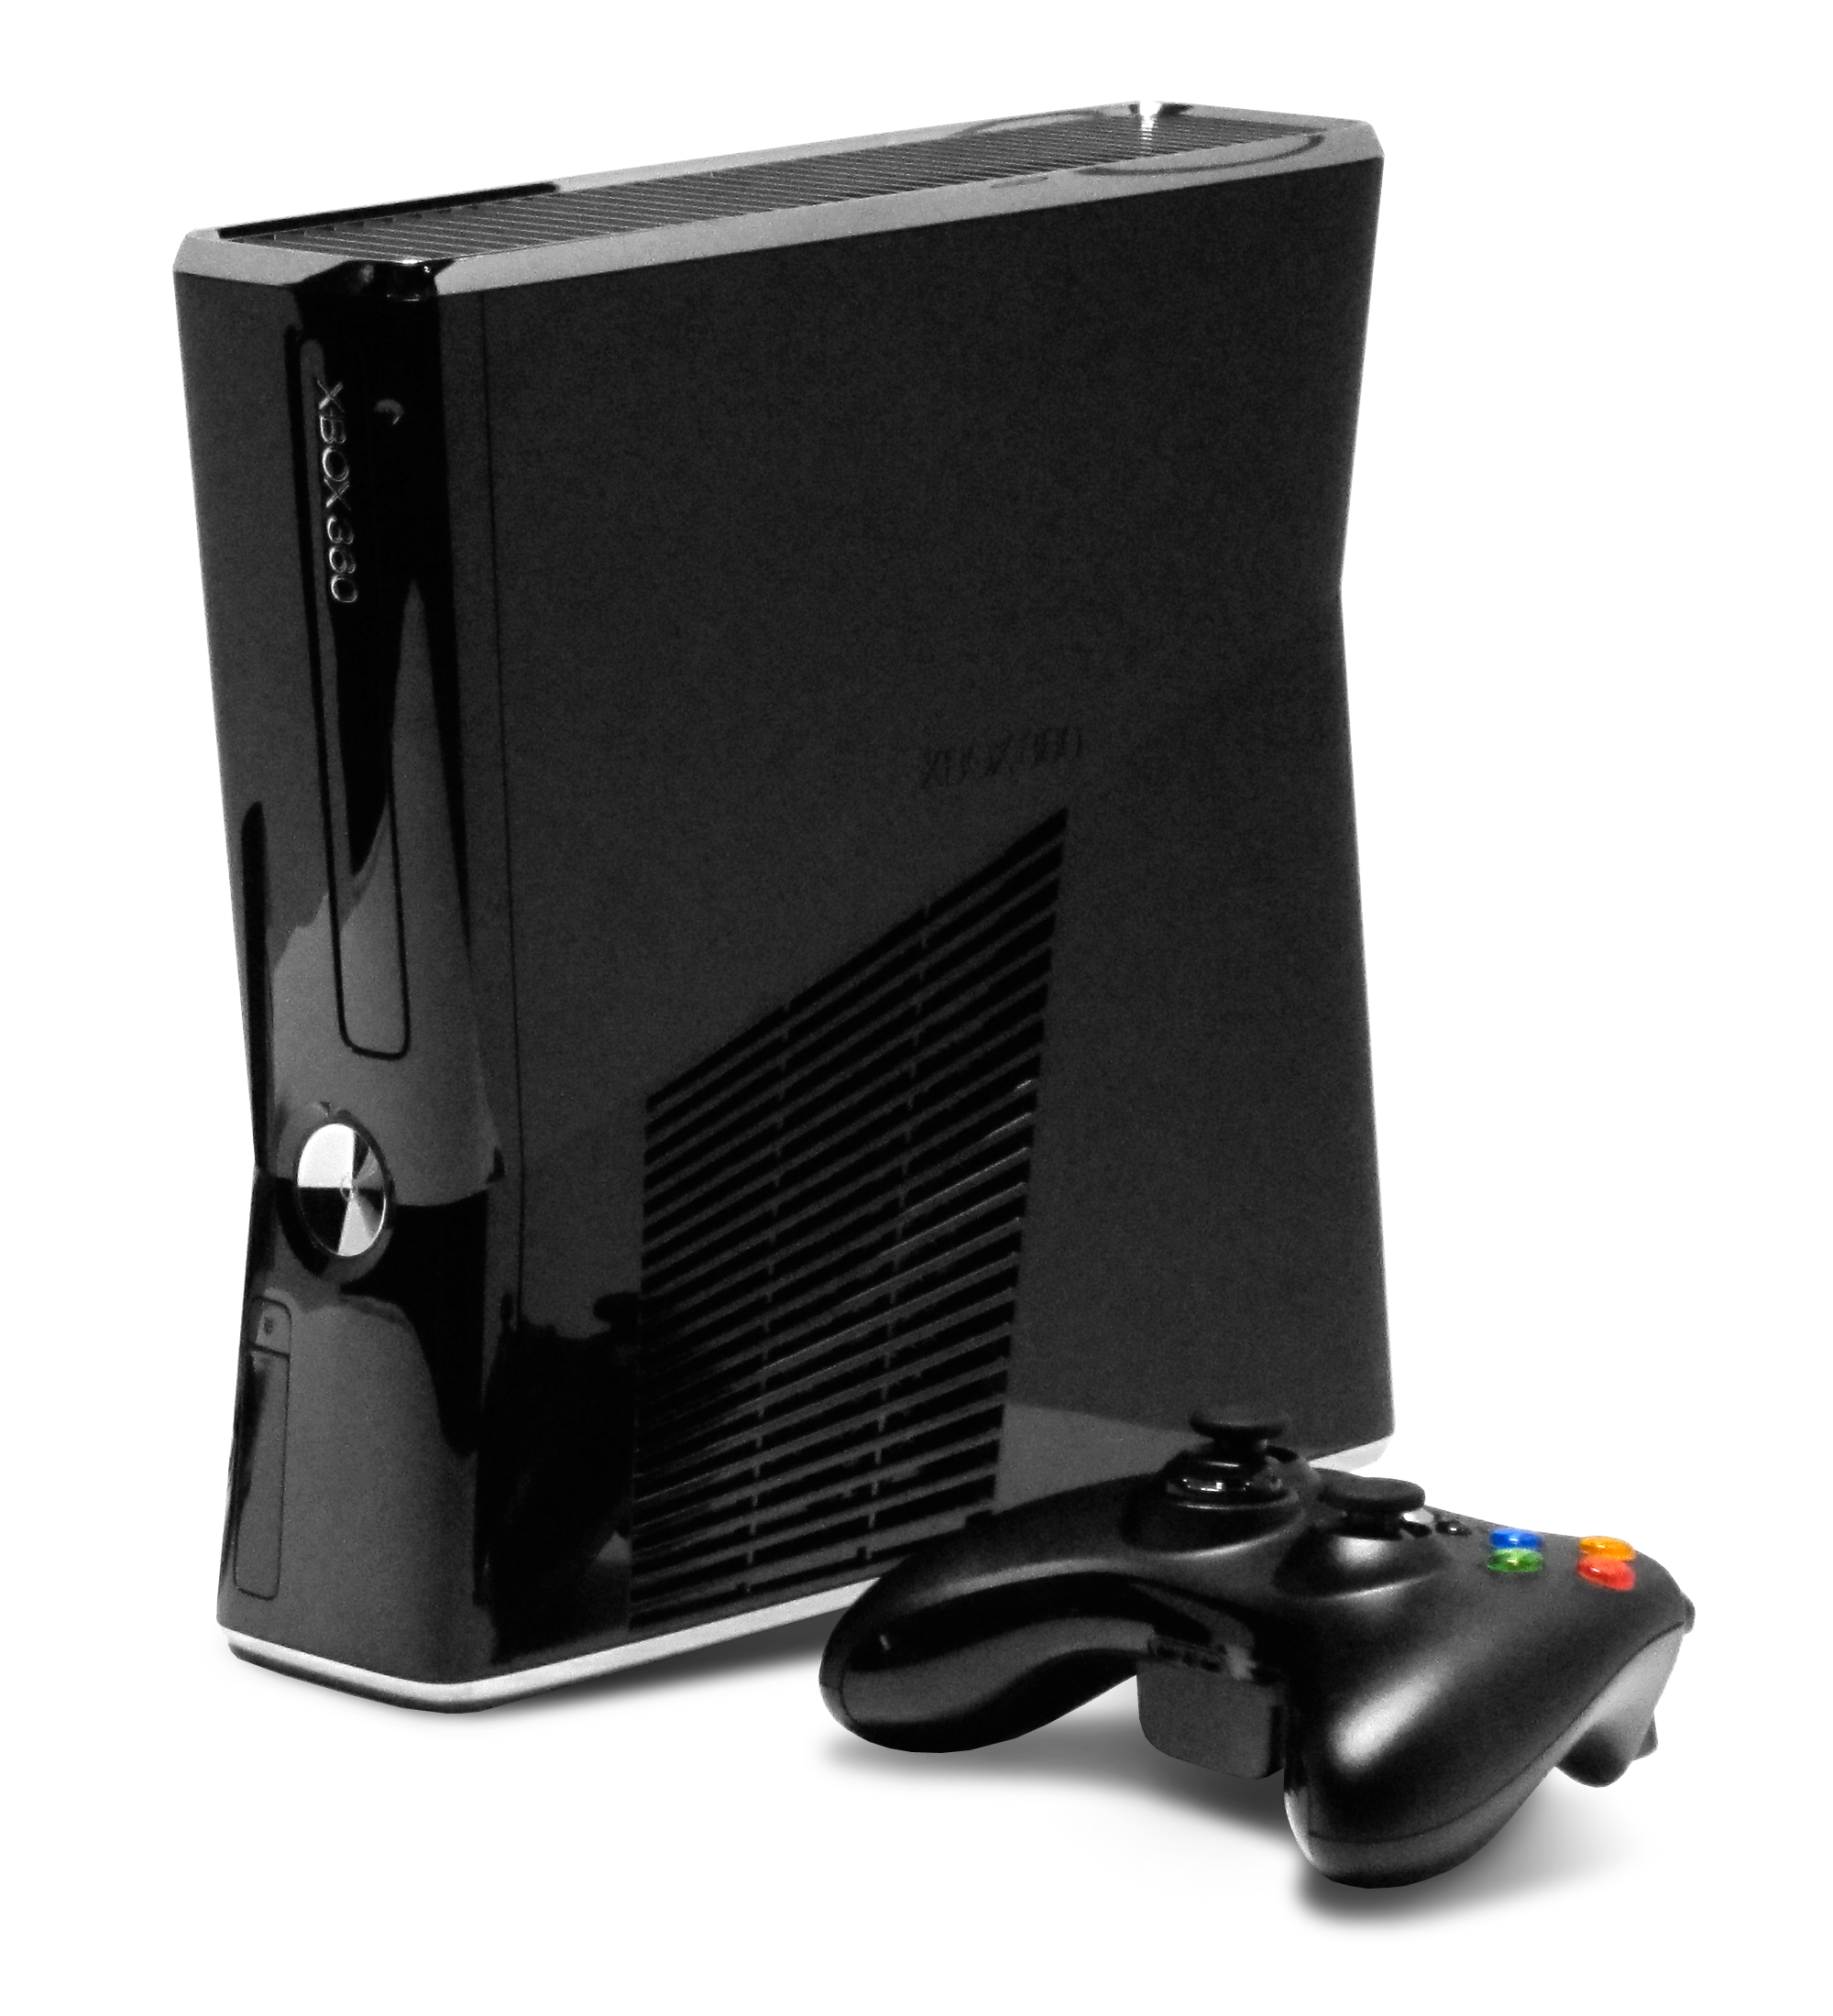 File:Xbox 360 S.png